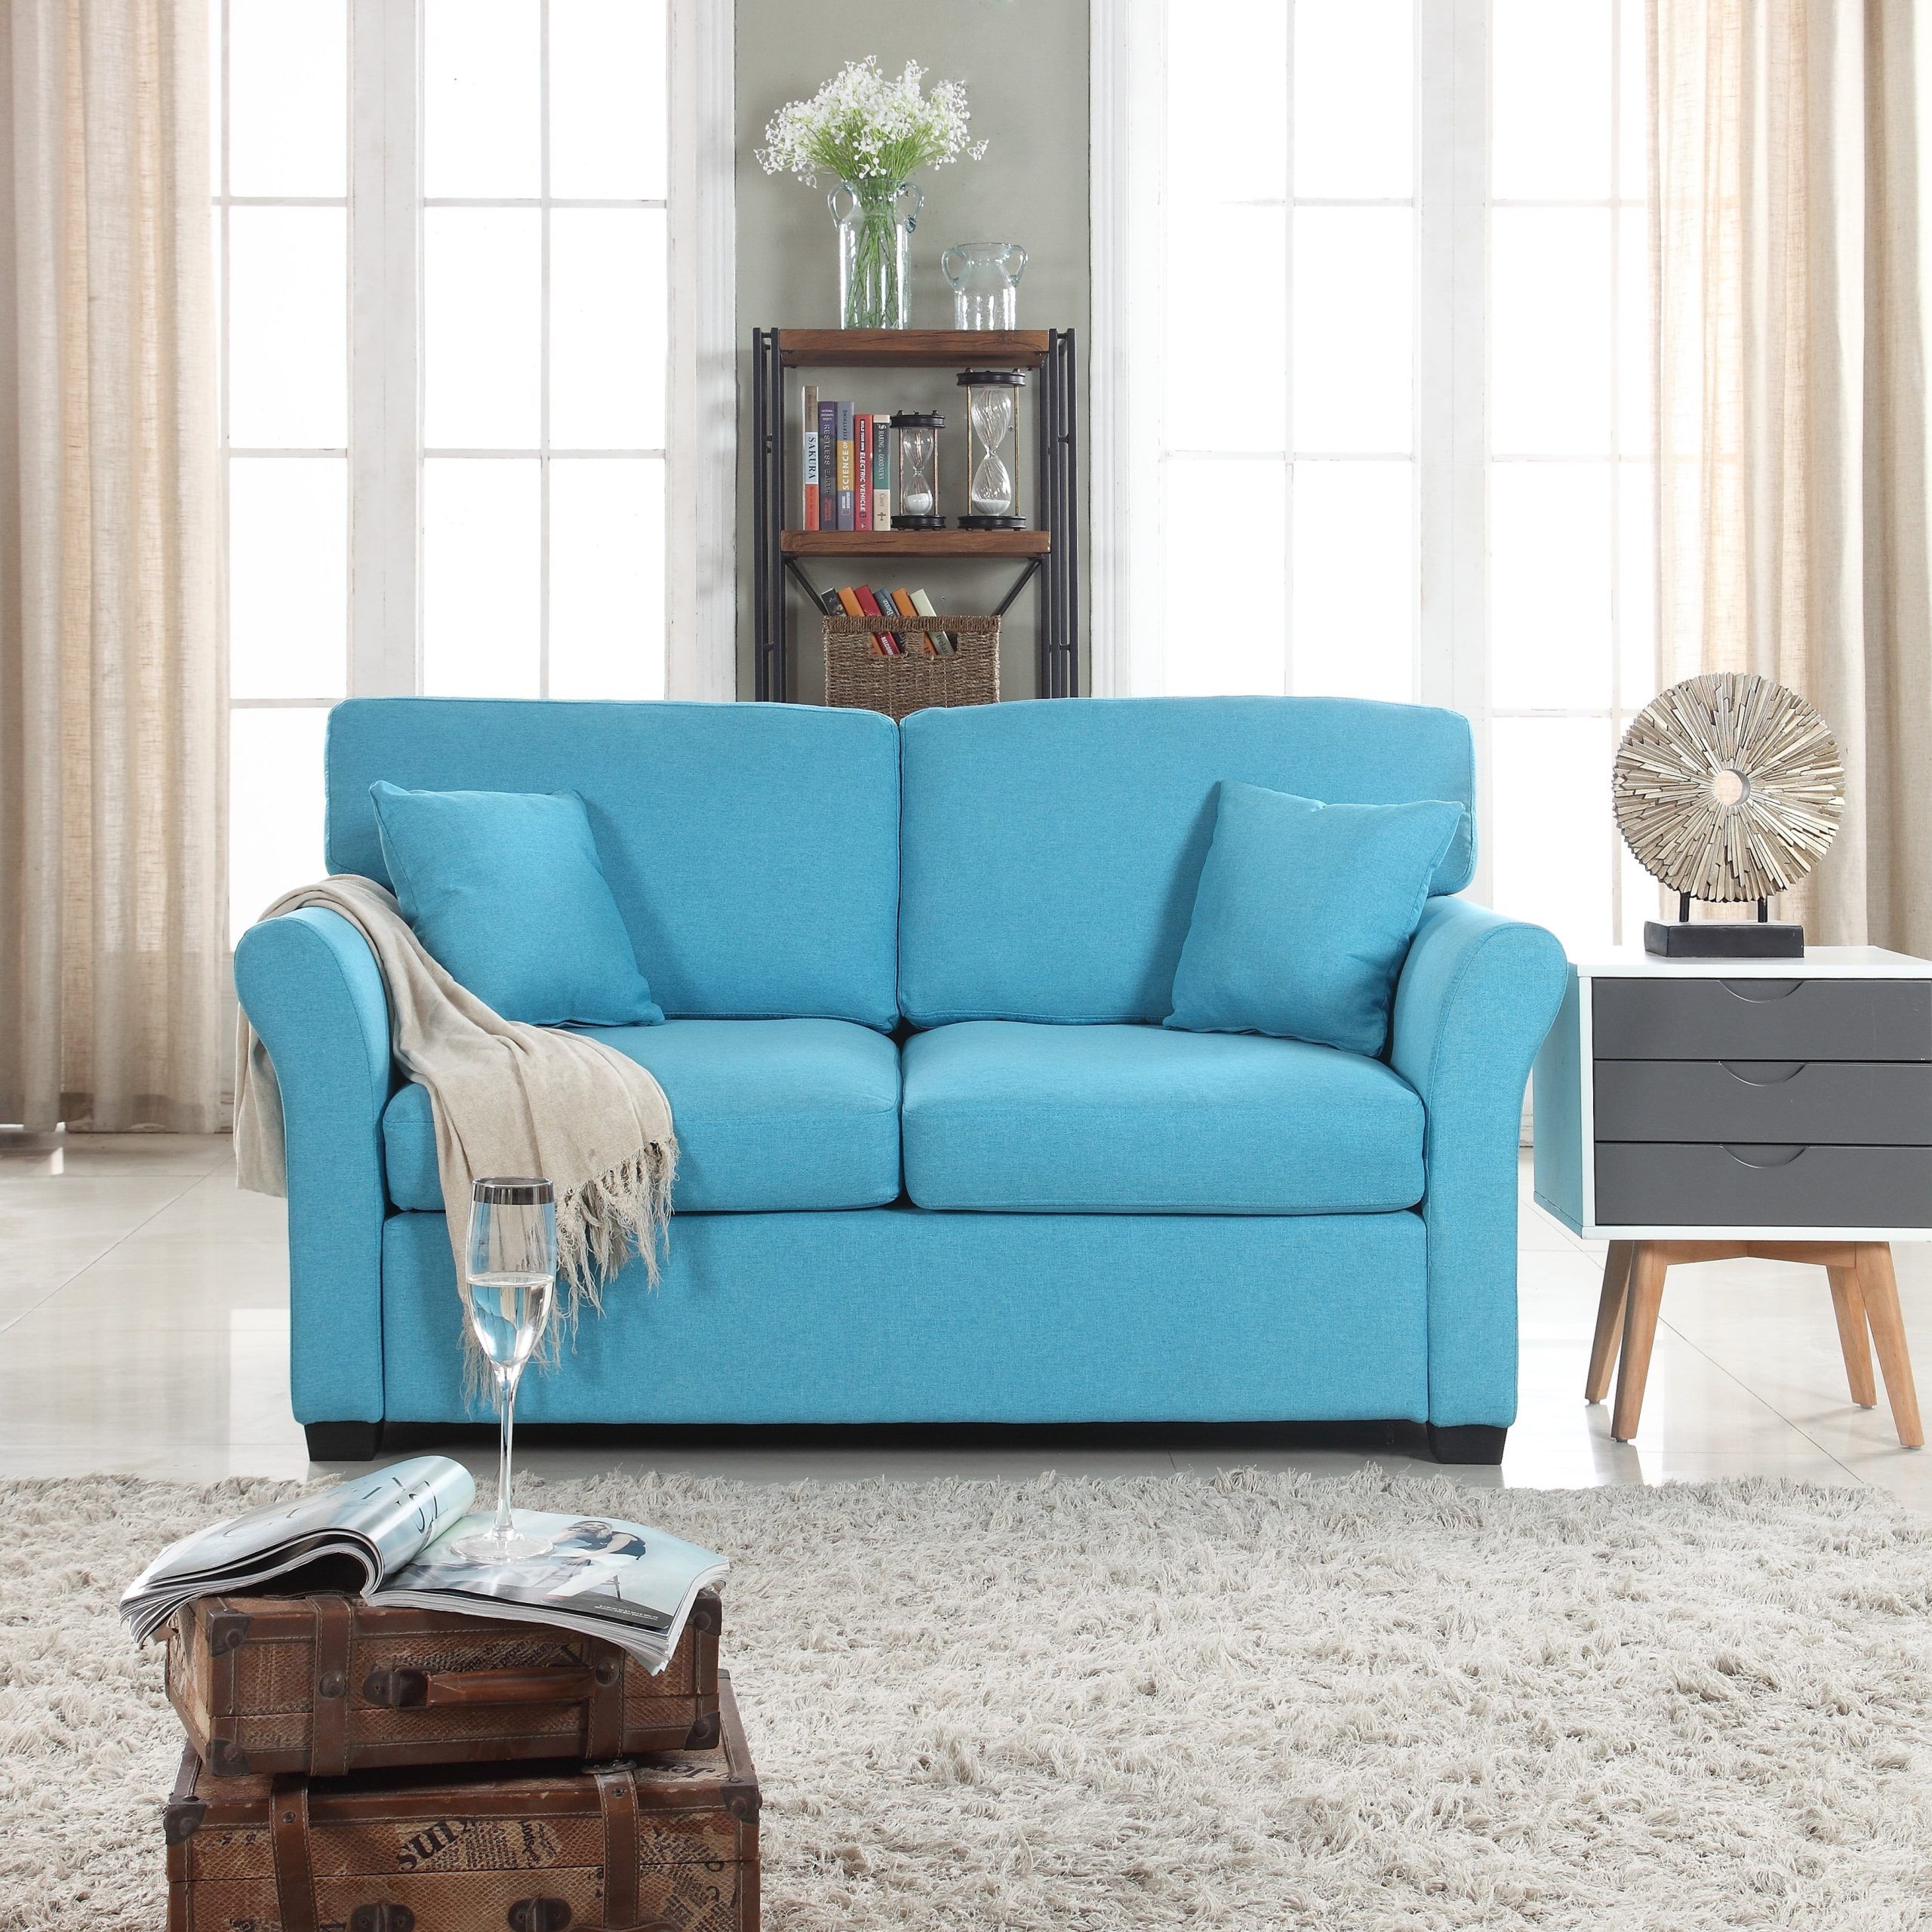 Classic And Traditional Comfortable Linen Fabric Loveseat Sofa Living With Regard To Modern Blue Linen Sofas (View 10 of 20)